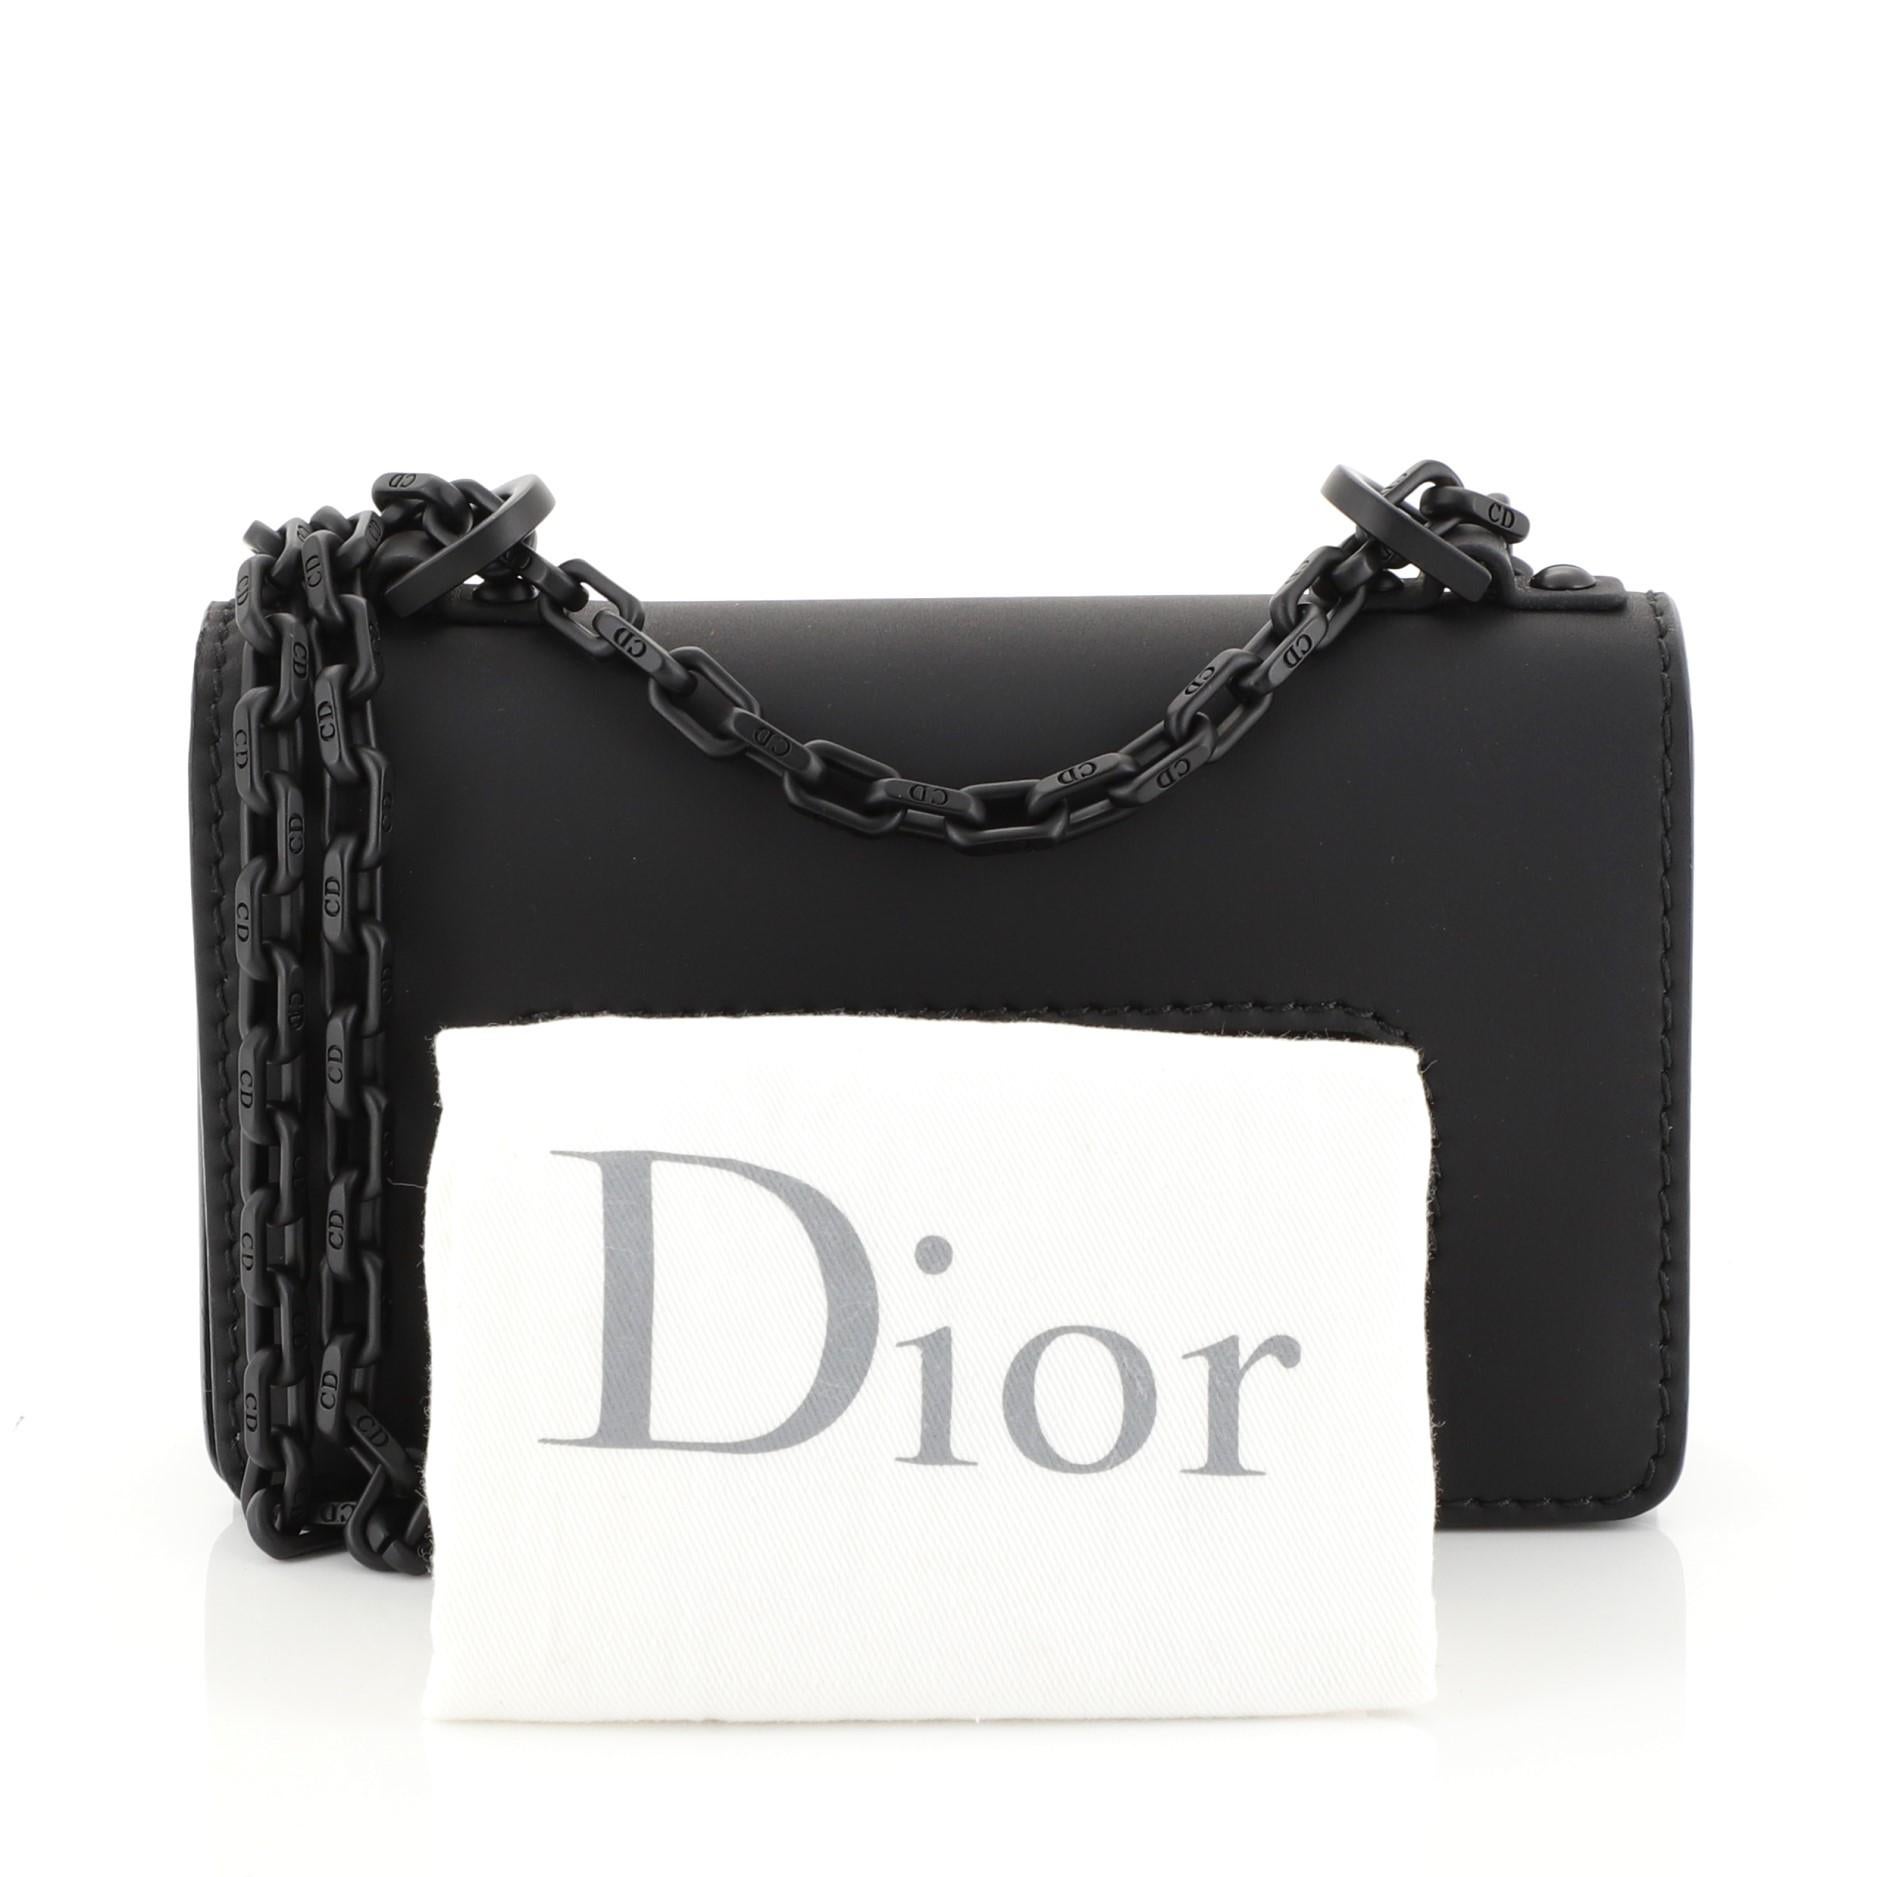 This Christian Dior Ultra Matte J'adior Flap Bag Matte Calfskin Mini, crafted from black calfskin leather, features chain link strap, slot handclasp, and matte black-tone hardware. Its flap opens to a black microfiber interior with slip pocket.